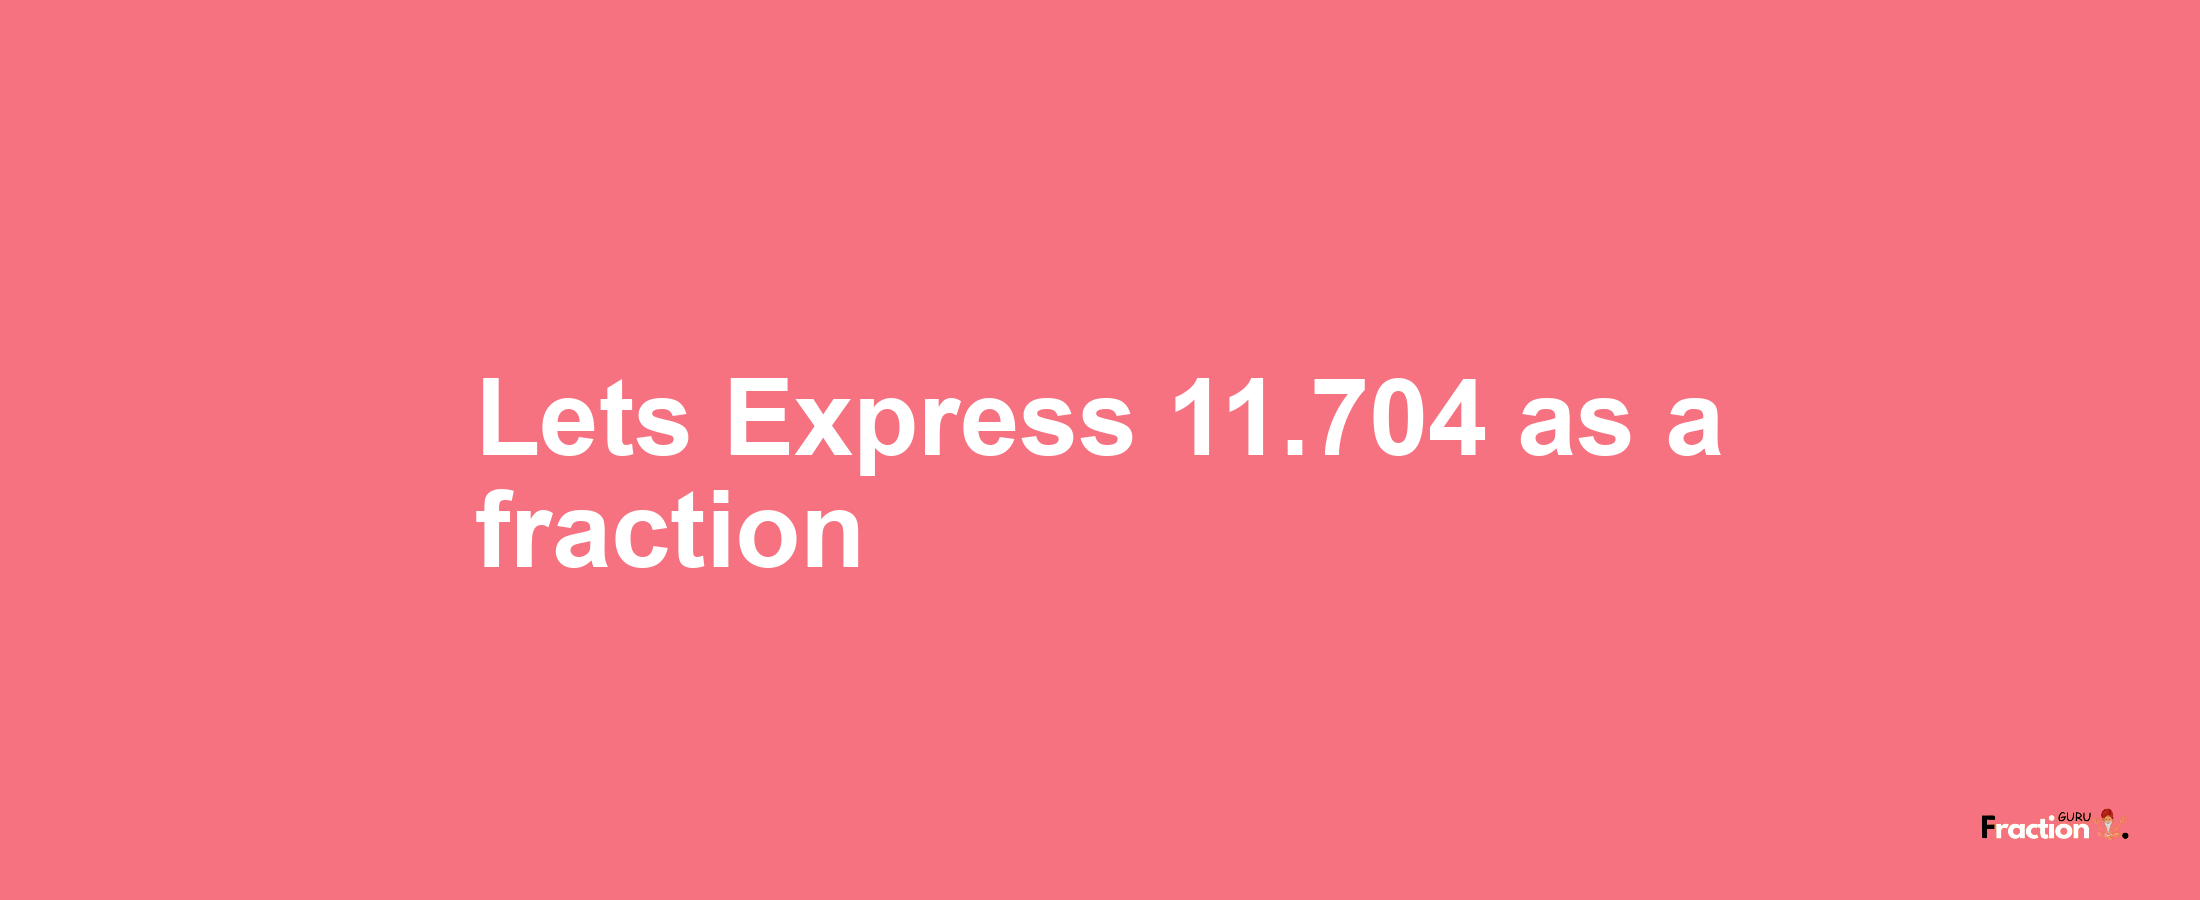 Lets Express 11.704 as afraction